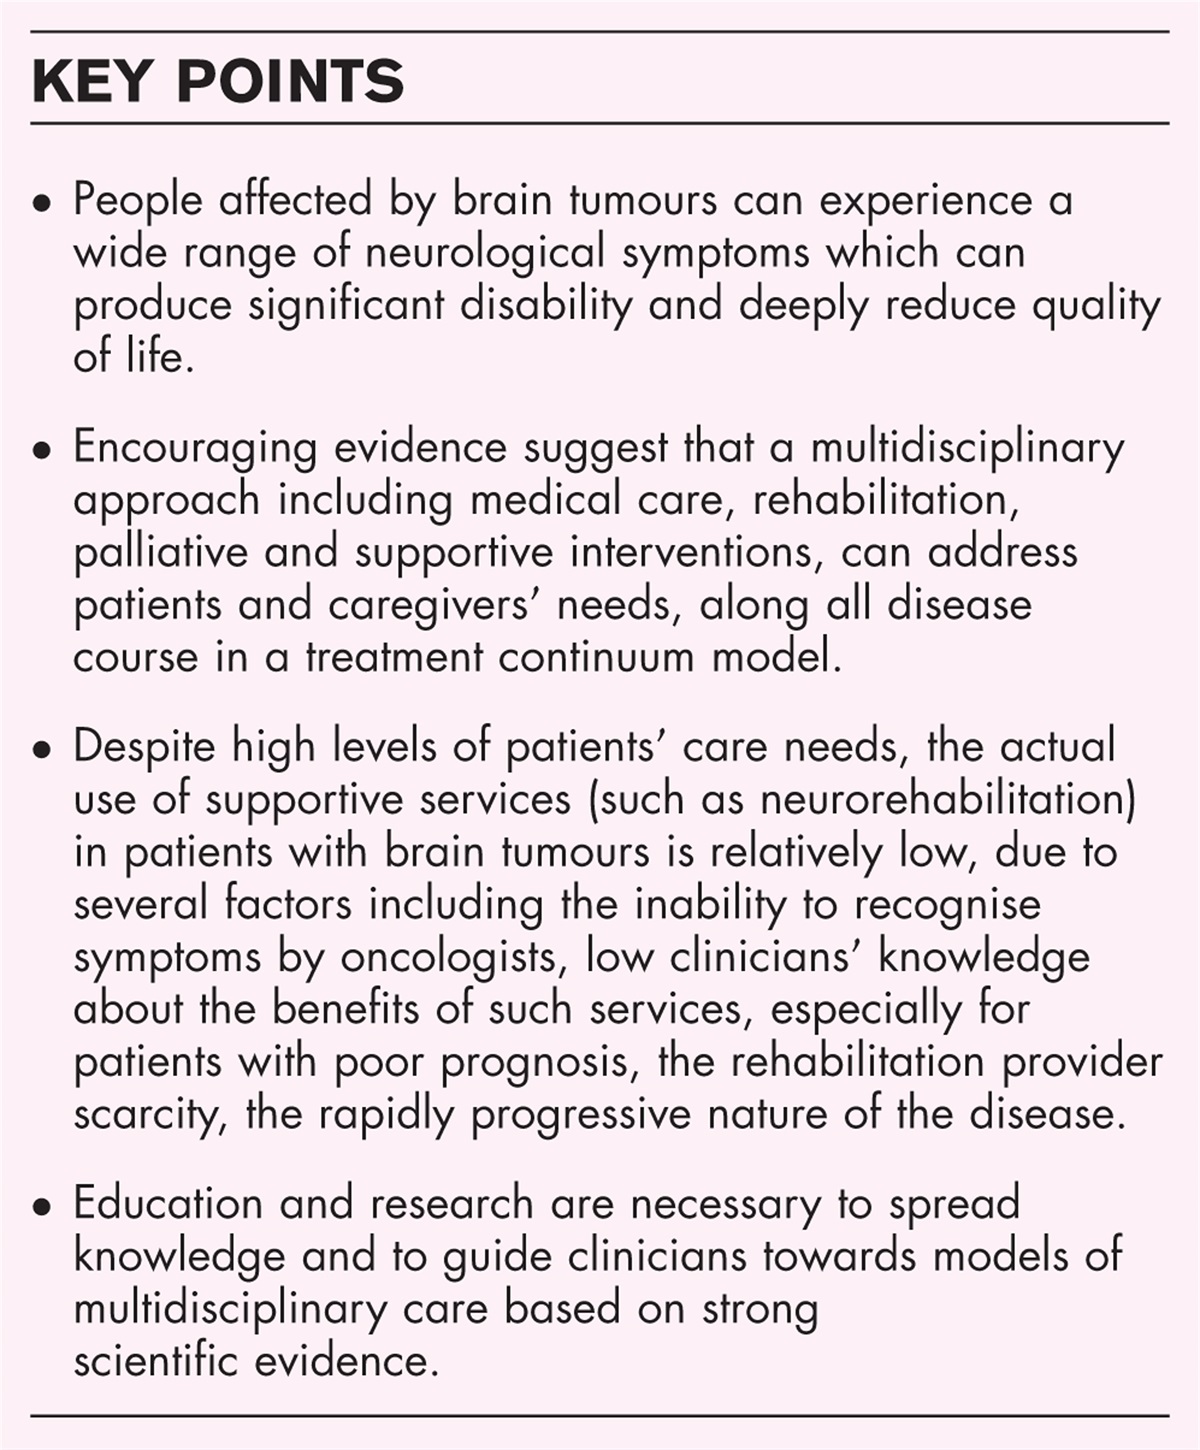 Neurorehabilitation in brain tumours: evidences and suggestions for spreading of knowledge and research implementation